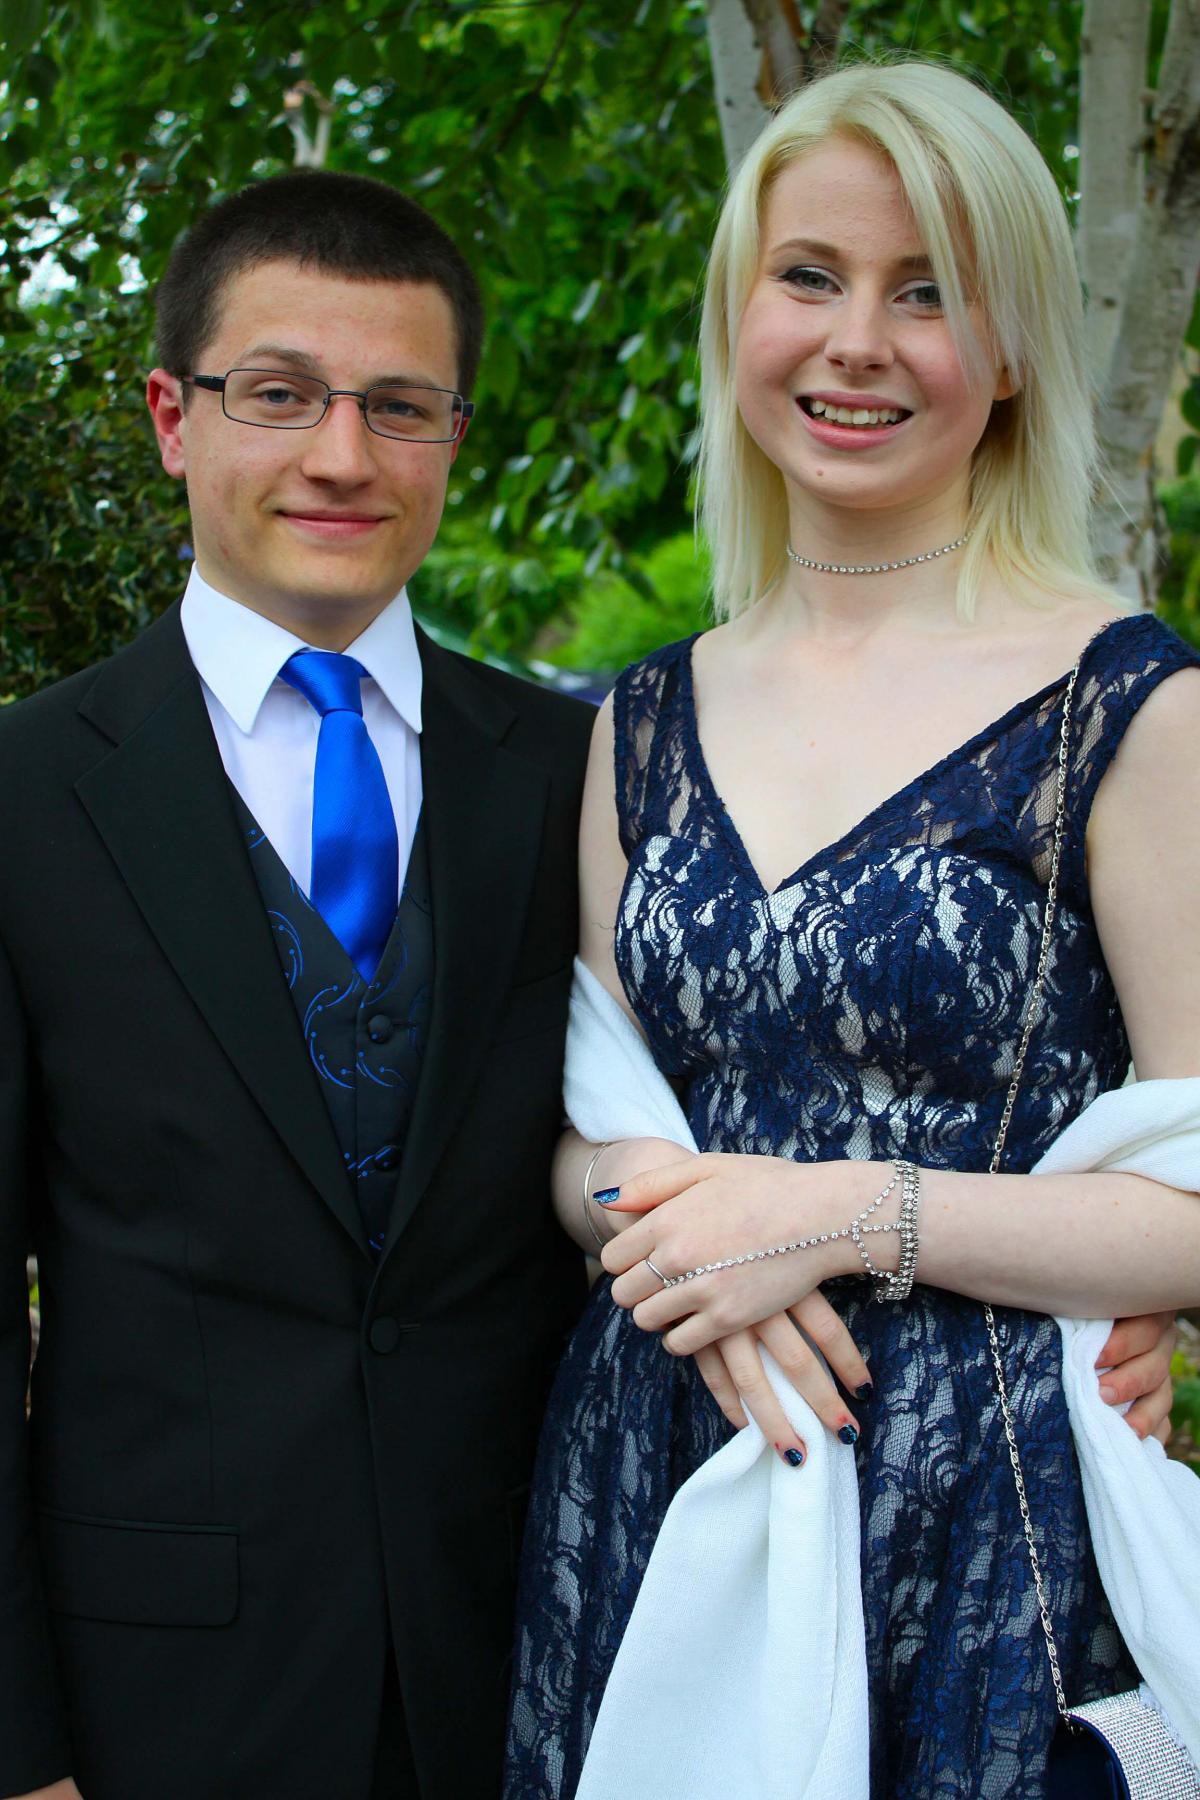 George Plumb, 16 and Bethany Robson, 16